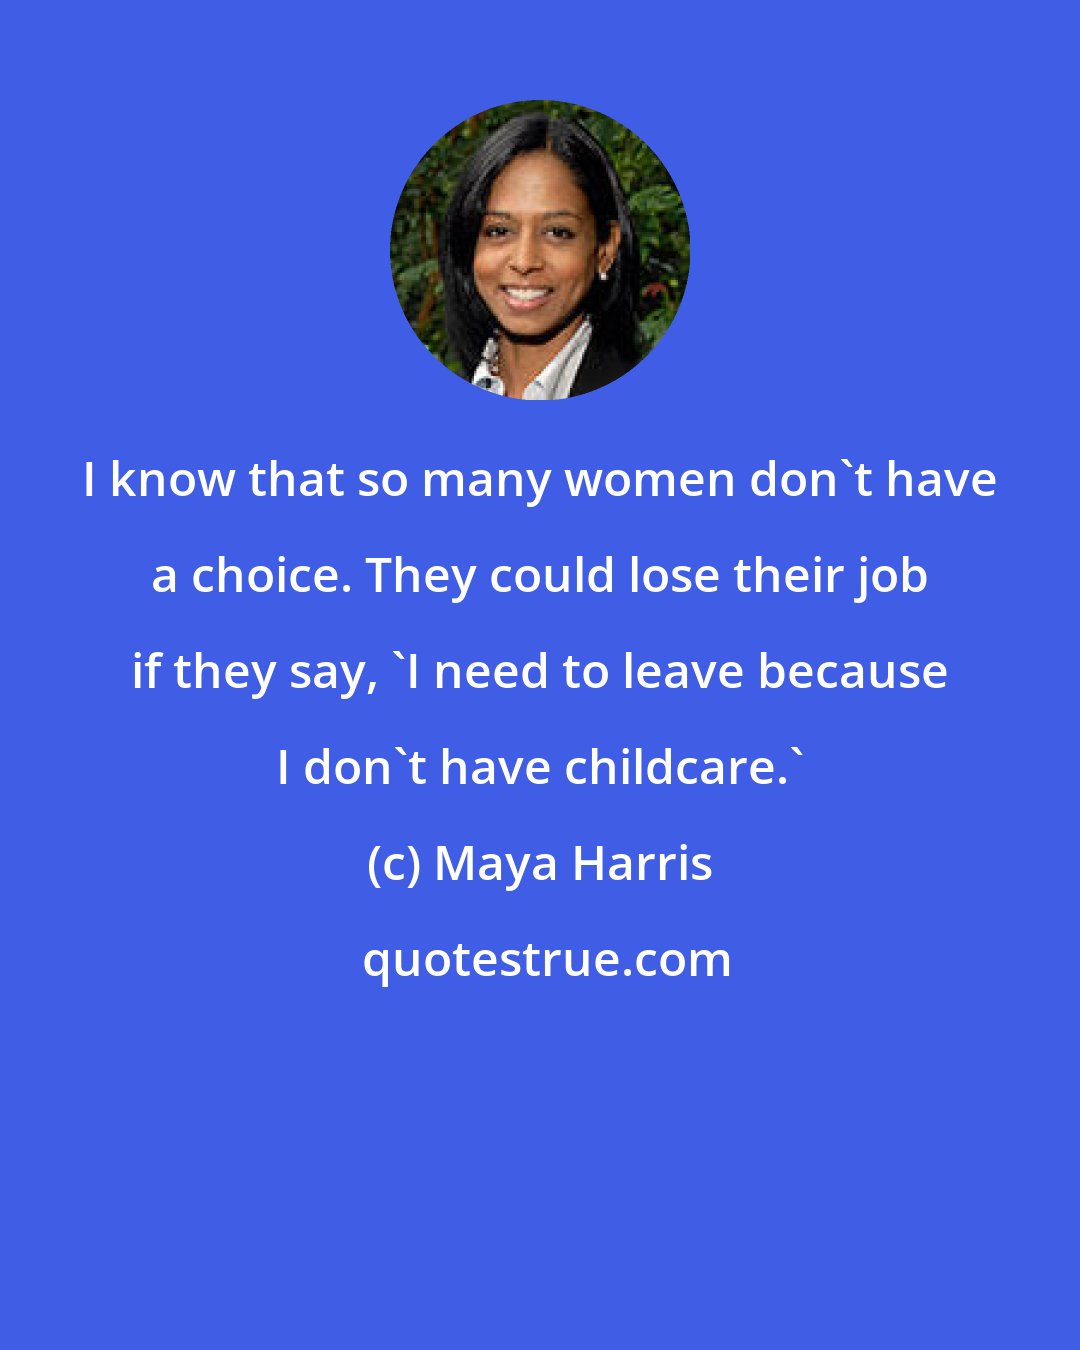 Maya Harris: I know that so many women don't have a choice. They could lose their job if they say, 'I need to leave because I don't have childcare.'